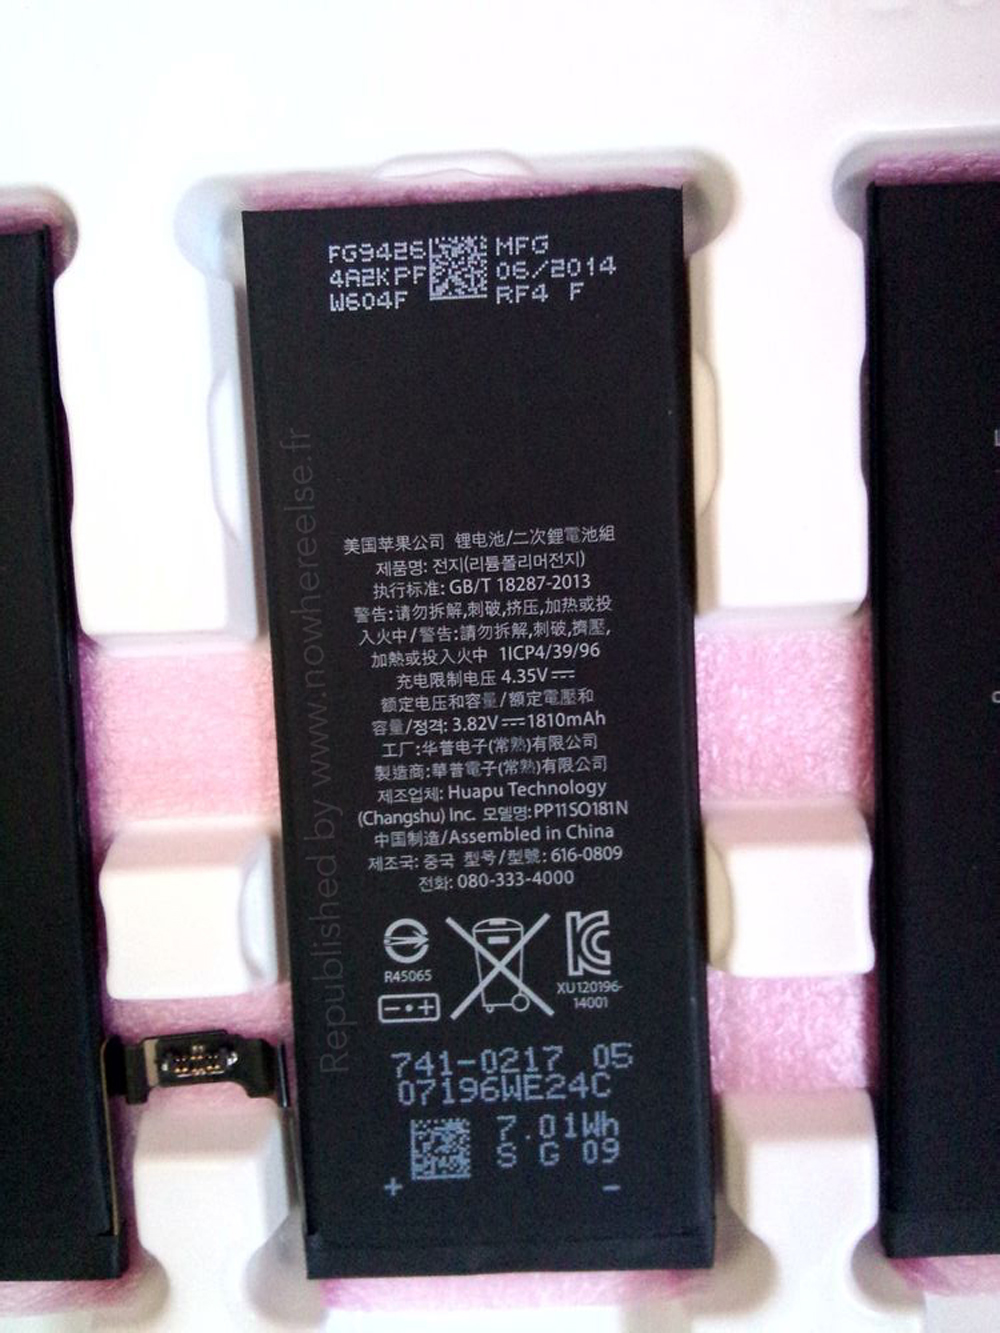 More Photos of Purported 1810 mAh Battery for 4.7-inch iPhone 6 Surface